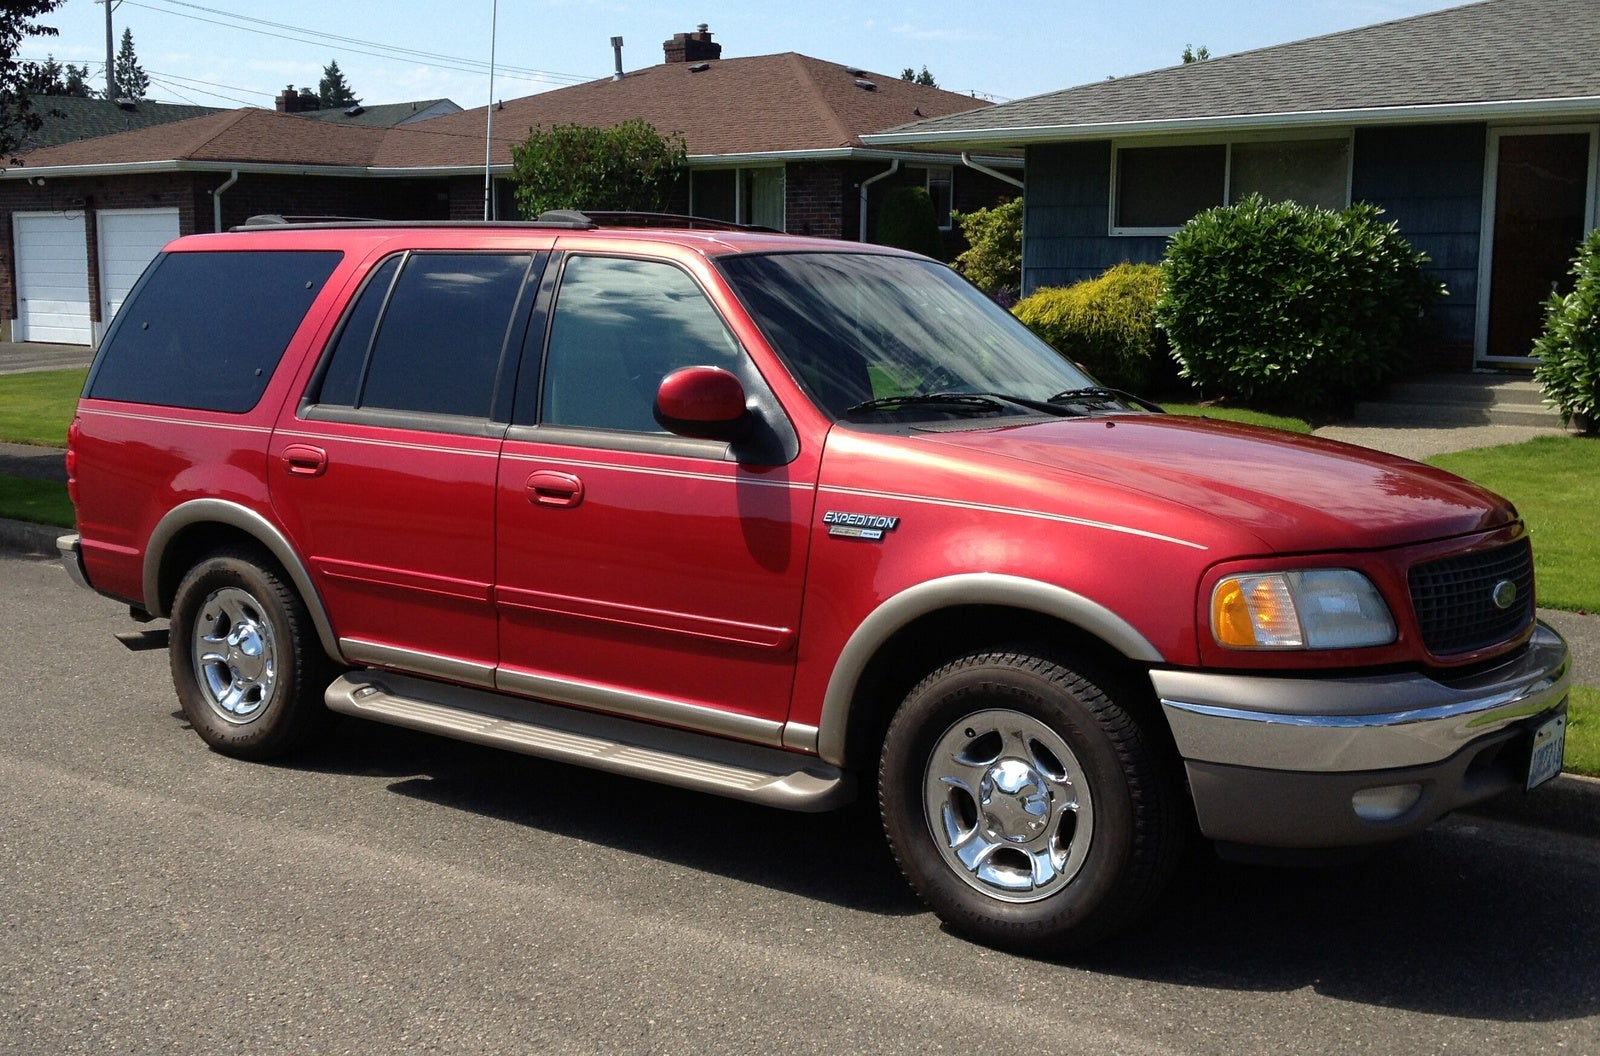 2002 Ford expedition edie bauer #3